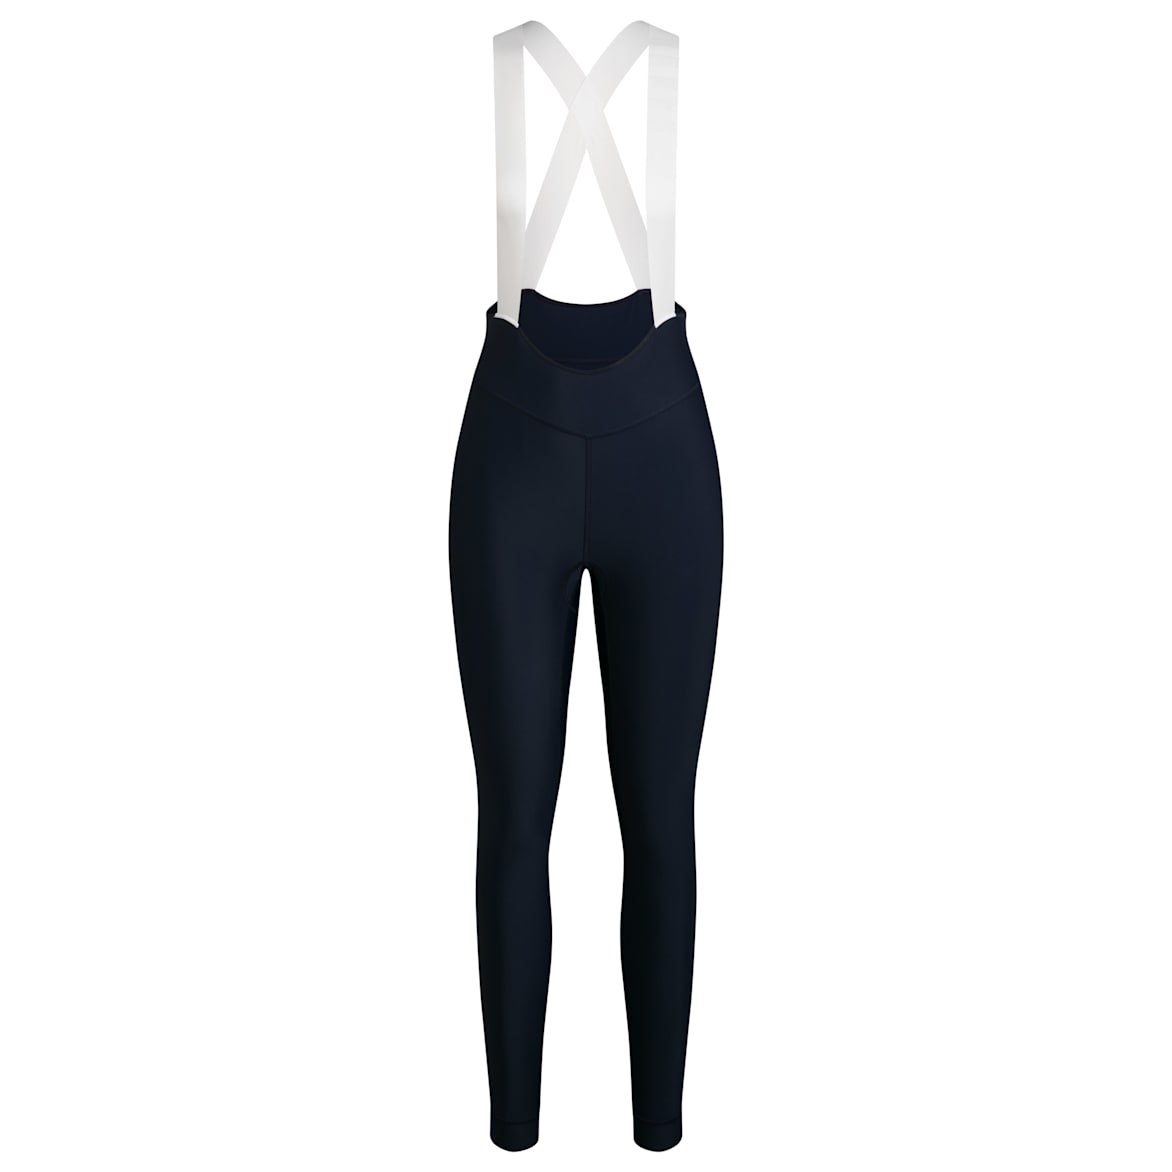 Women`s Pro Team Training Tights with Pad